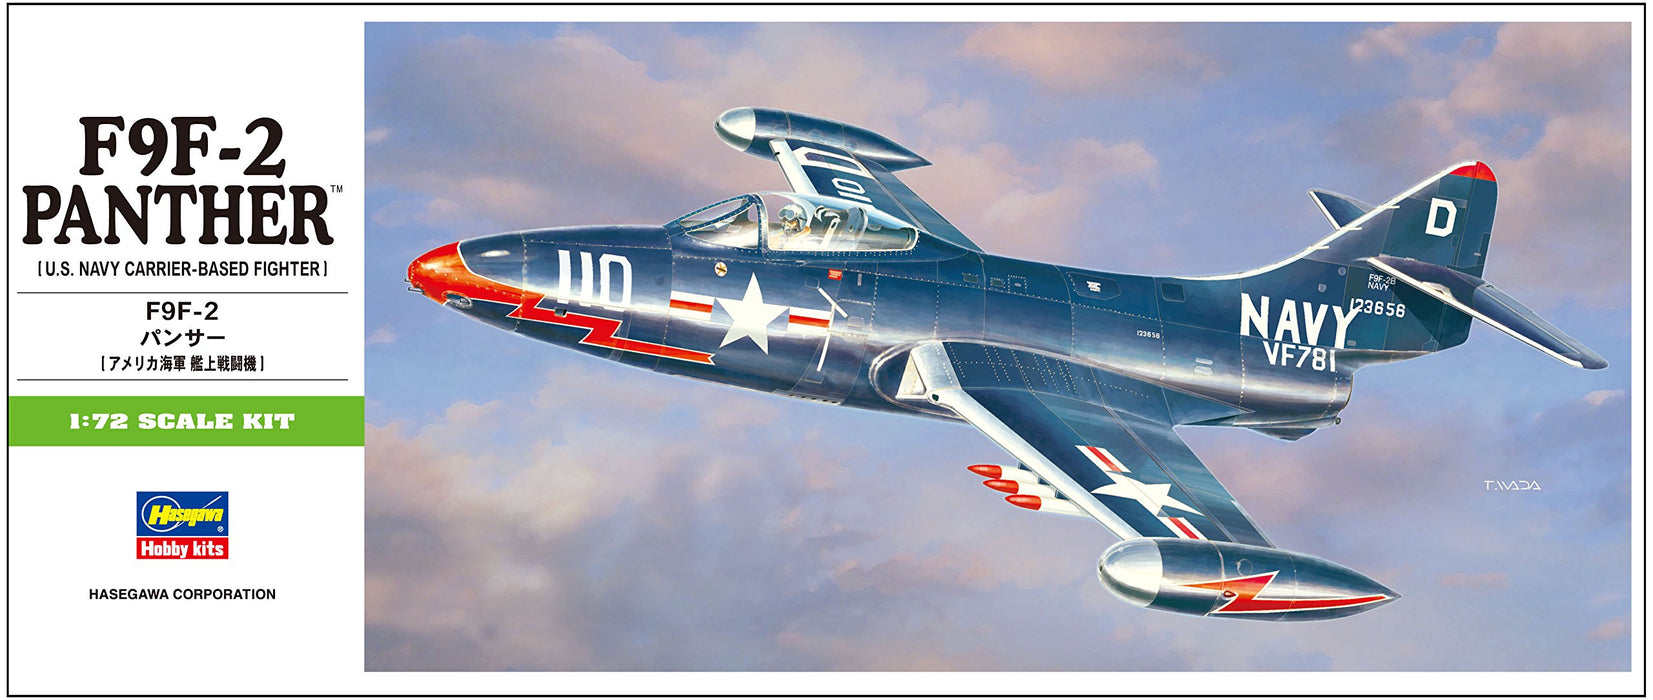 HASEGAWA 1/72 F9F-2 Panther U.S. Navy Carrier-Based Fighter Plastic Model